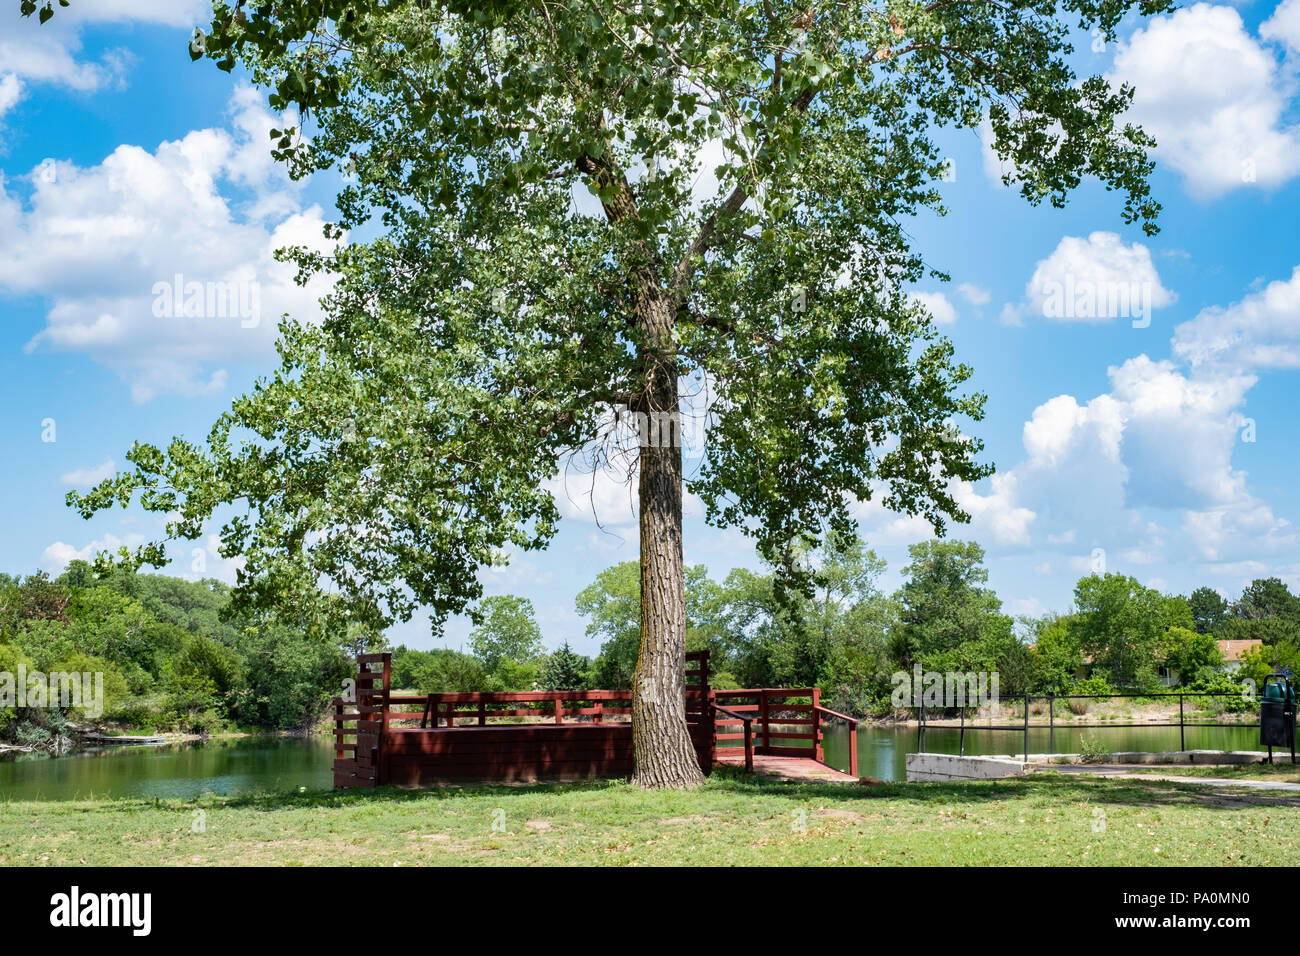 A large cottonwood tree, Populus deltoides, of the poplar species, in Kansas, USA. Stock Photo